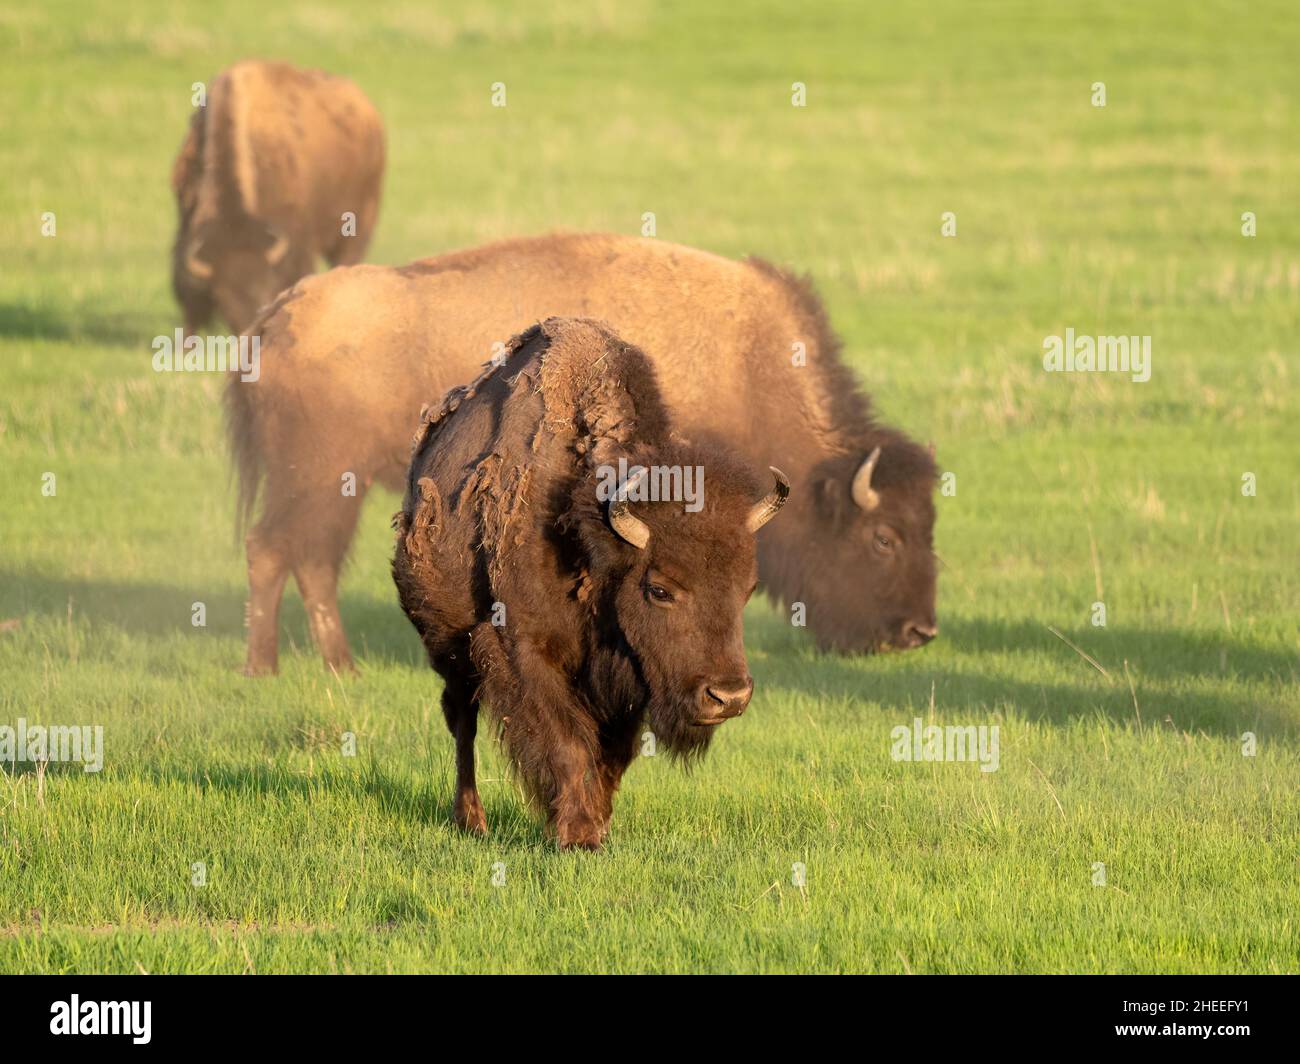 Adult bison, Bison bison, grazing in Lamar Valley, Yellowstone National Park, Wyoming. Stock Photo